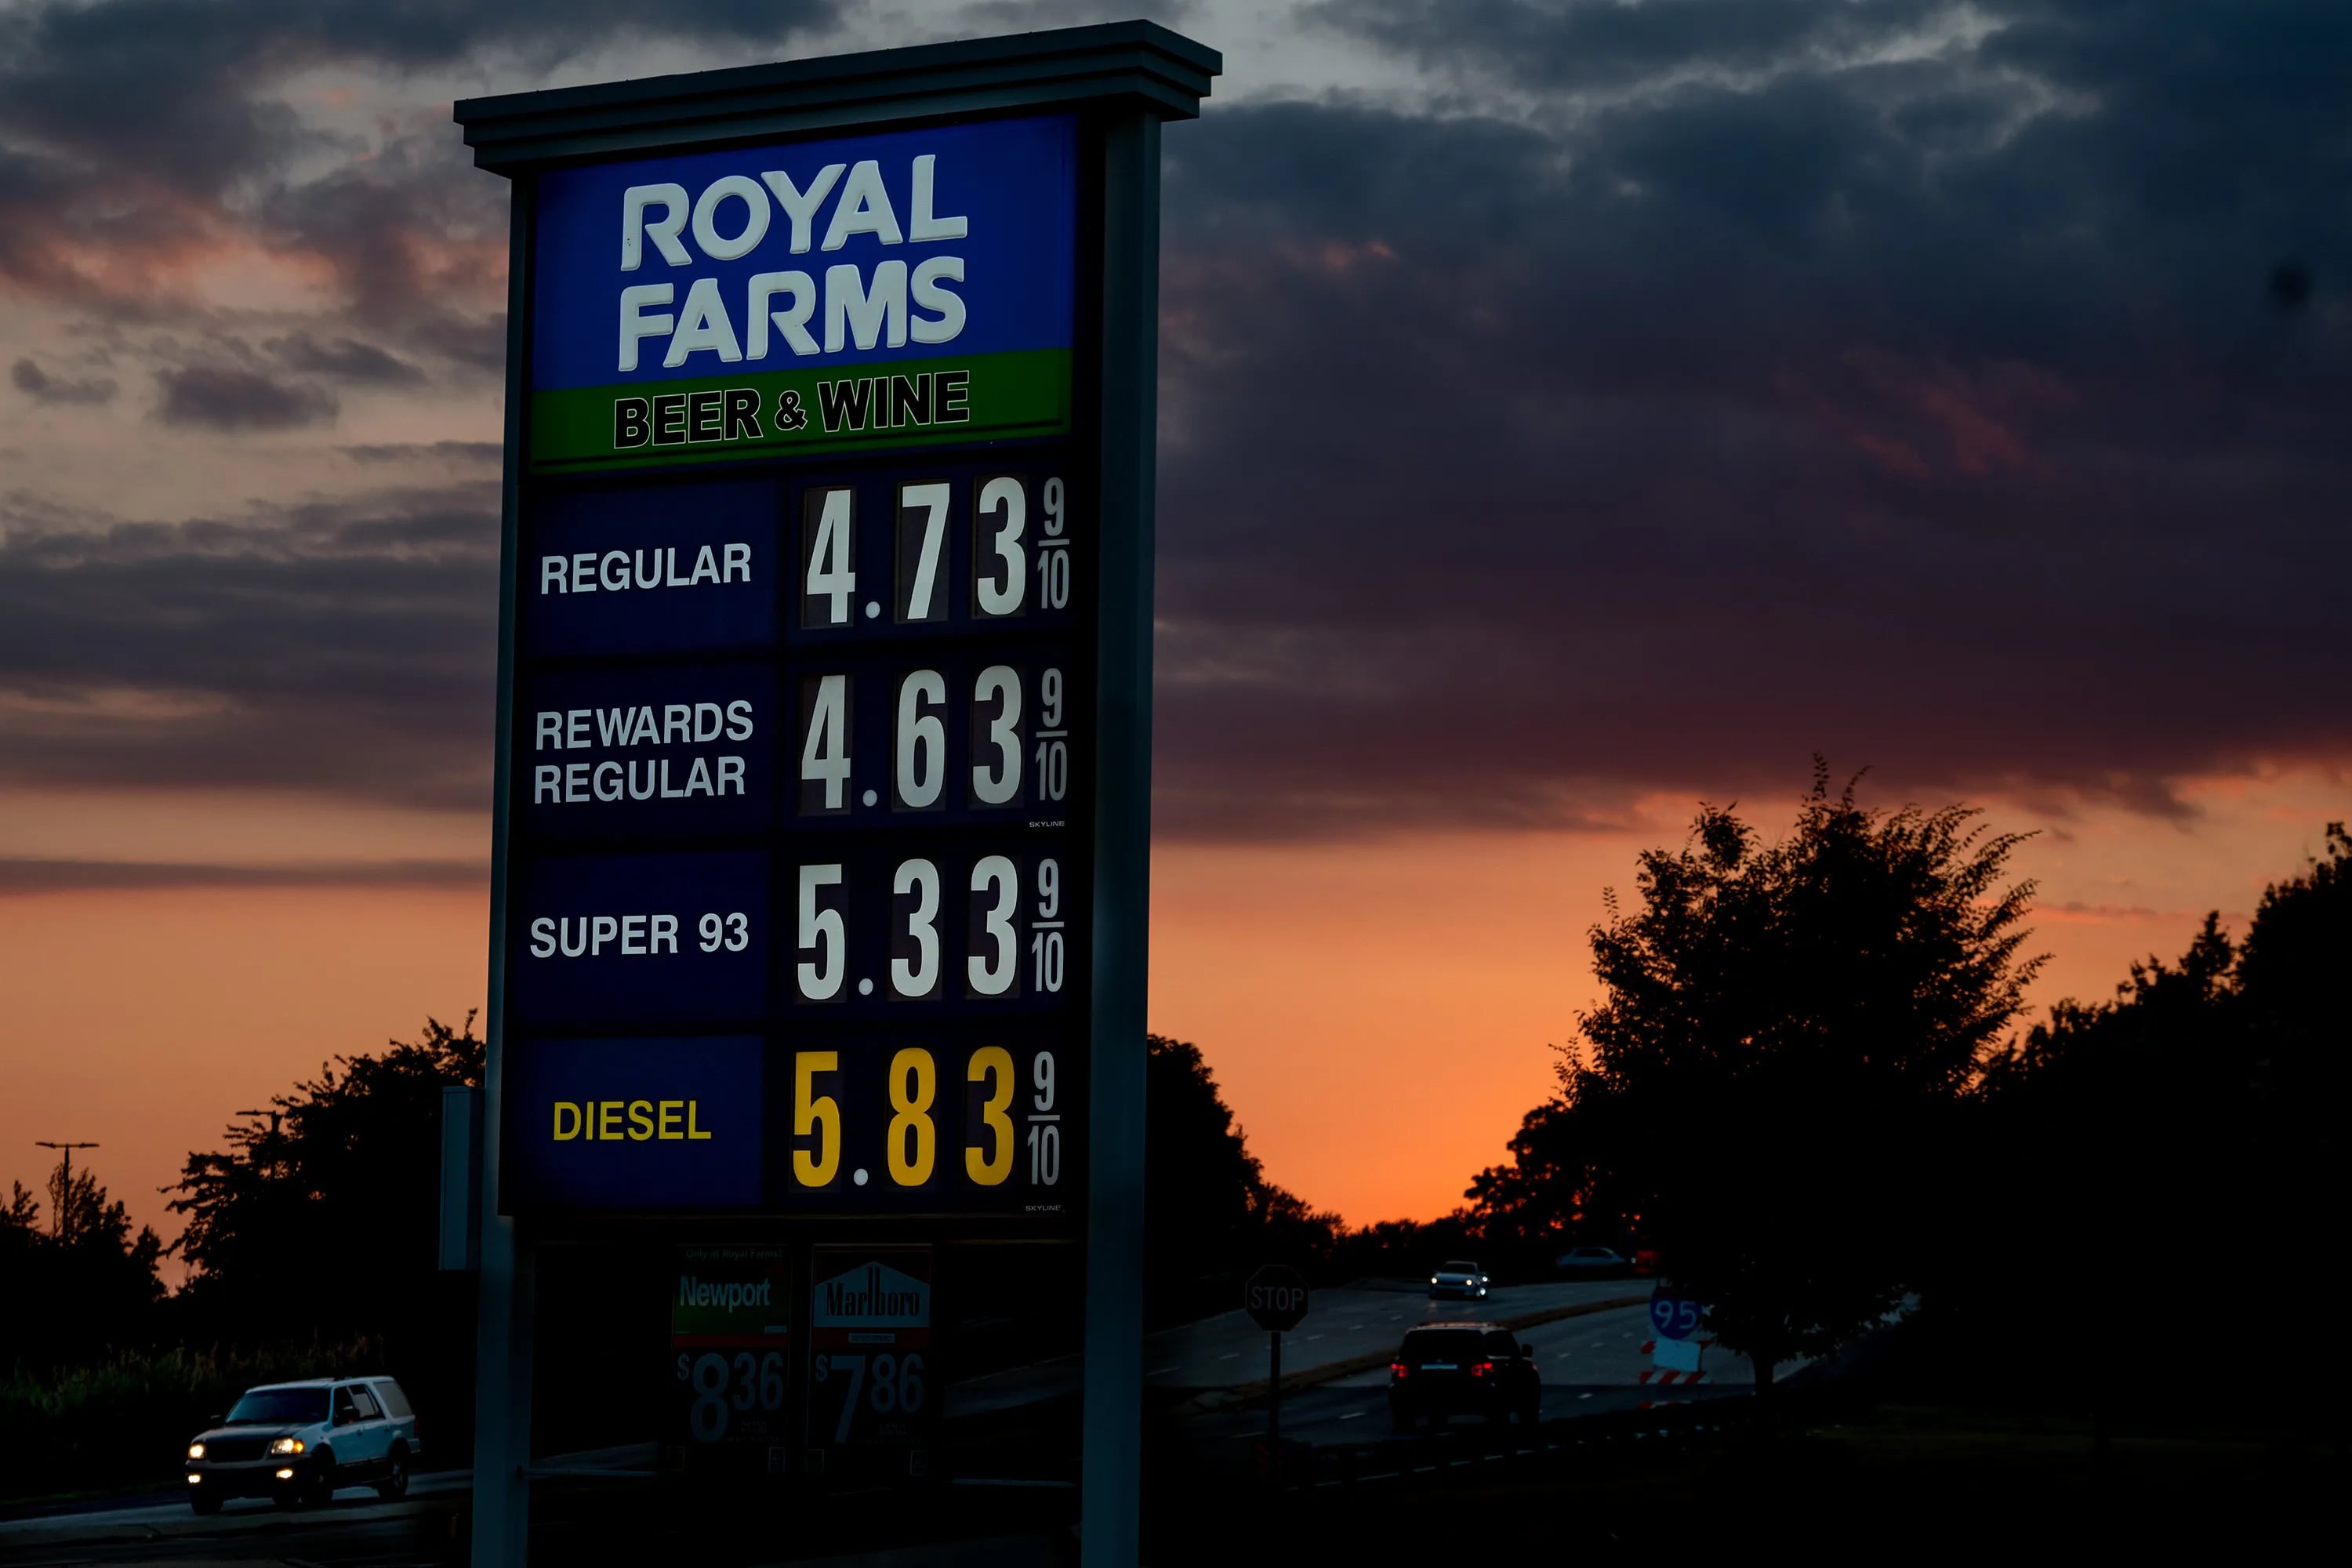 The Royal Farms on Stewart Ave, just off I-95 in Ridley Park, selling regular unleaded gas for $4.739 a gallon on July 10, 2022.